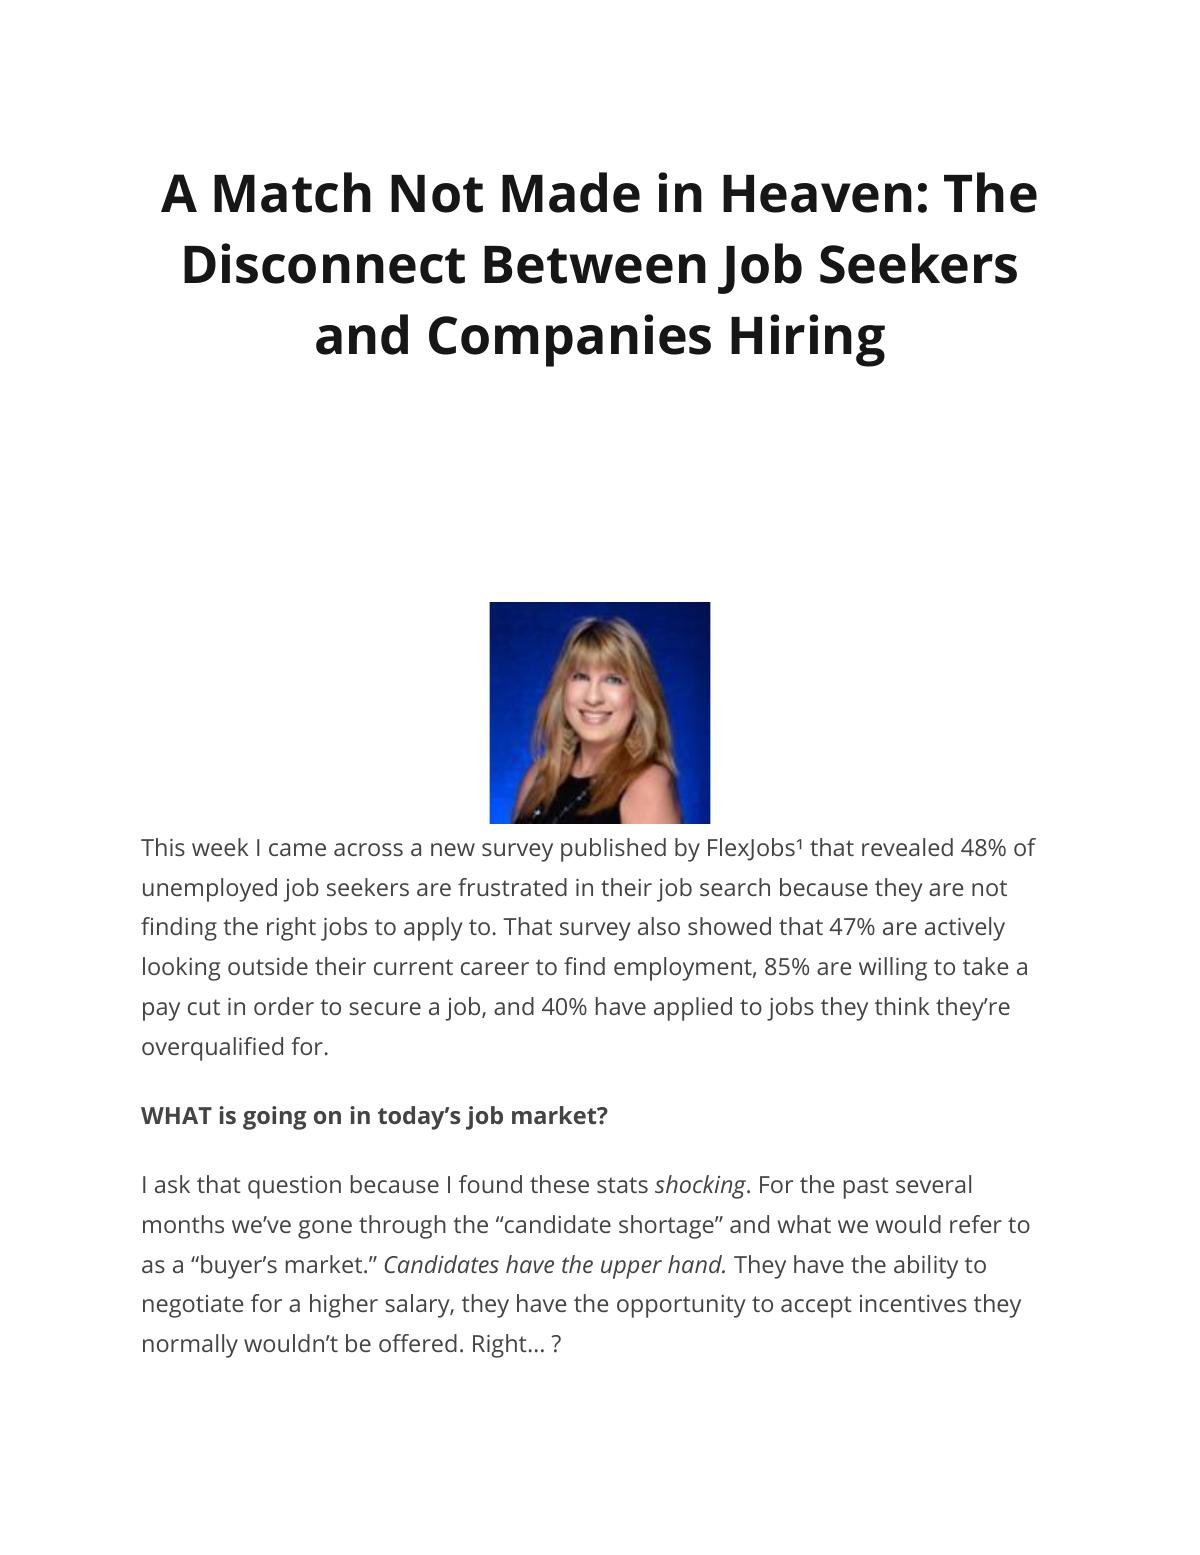 A Match Not Made in Heaven: The Disconnect Between Job Seekers and Companies Hiring     